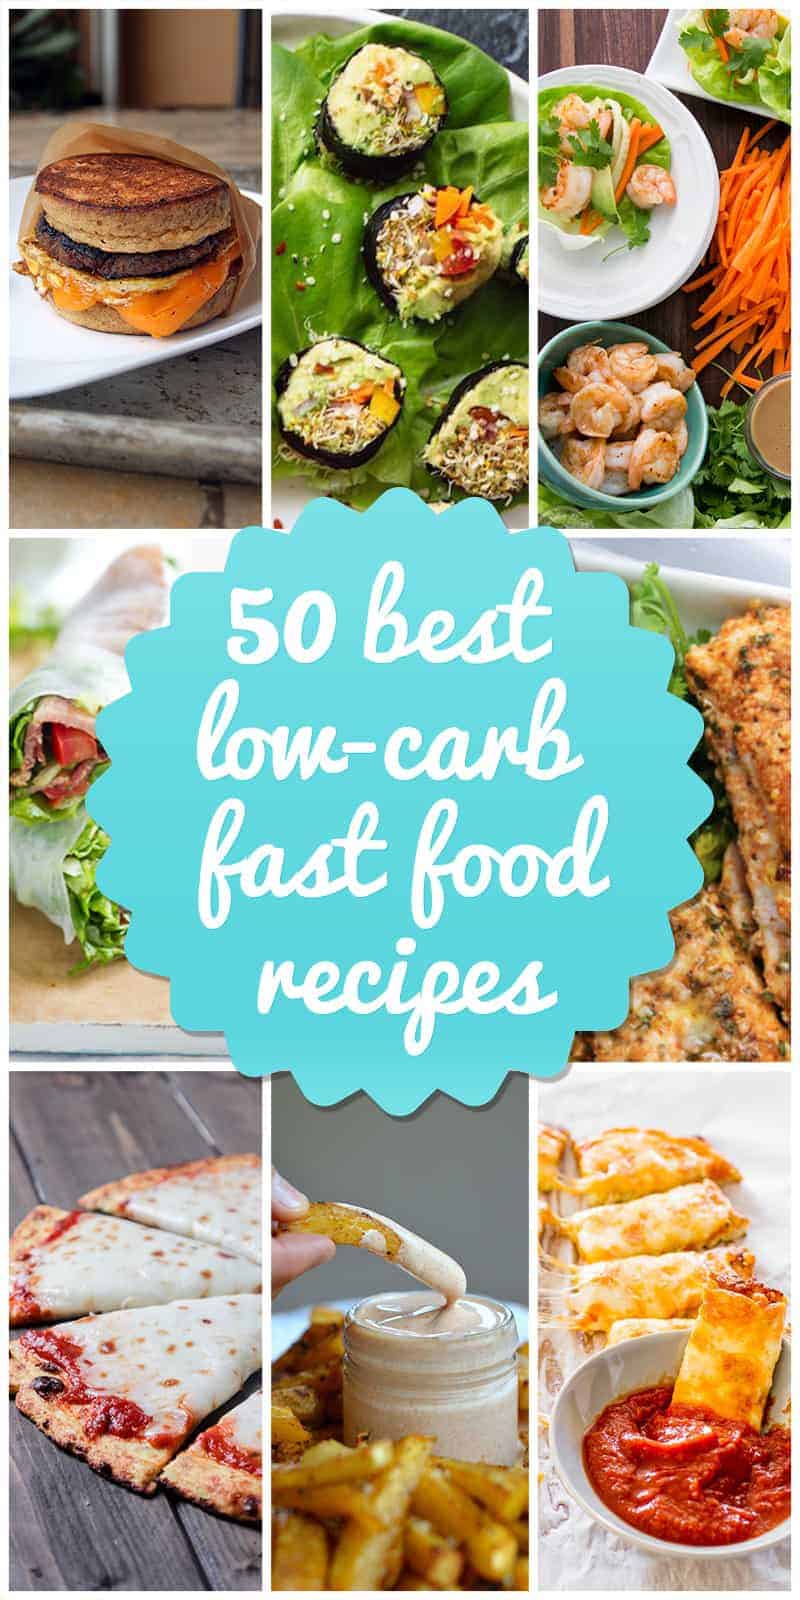 Low-carb fast food recipes and ideas